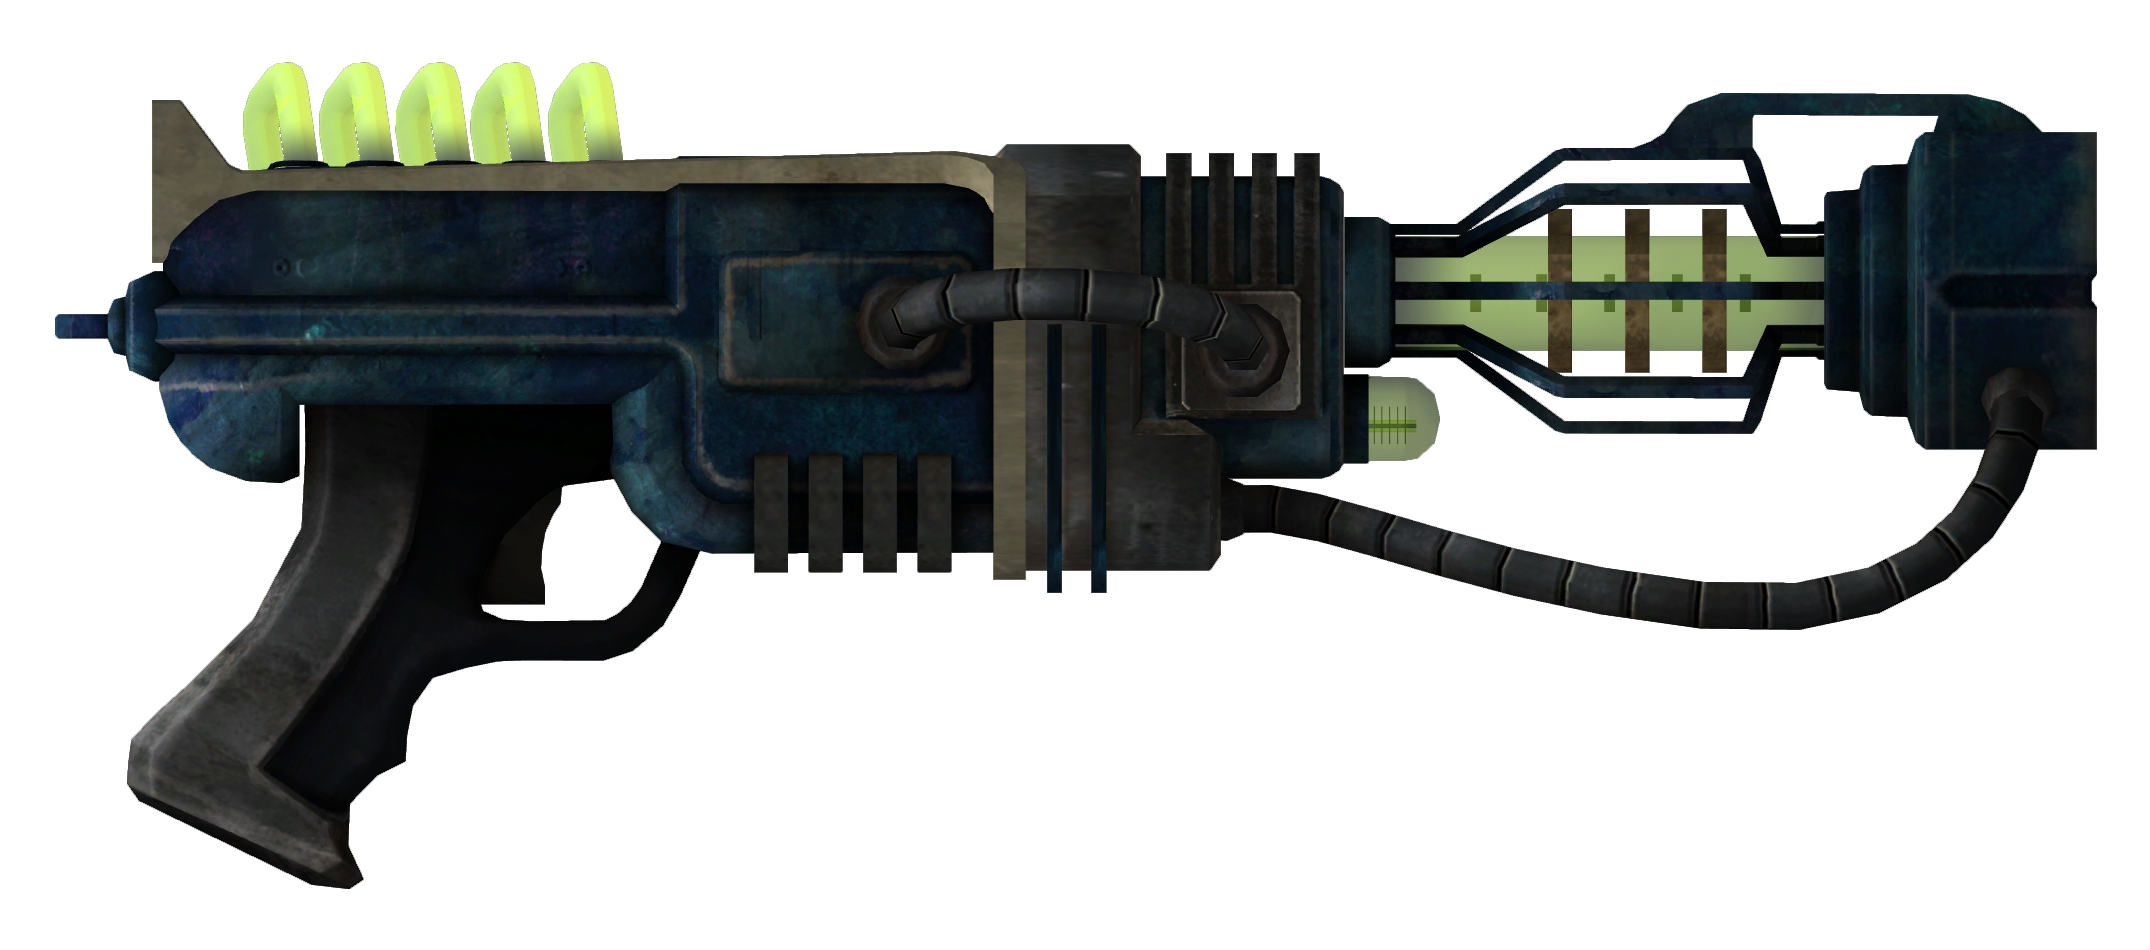 fallout new vegas guns or energy weapons